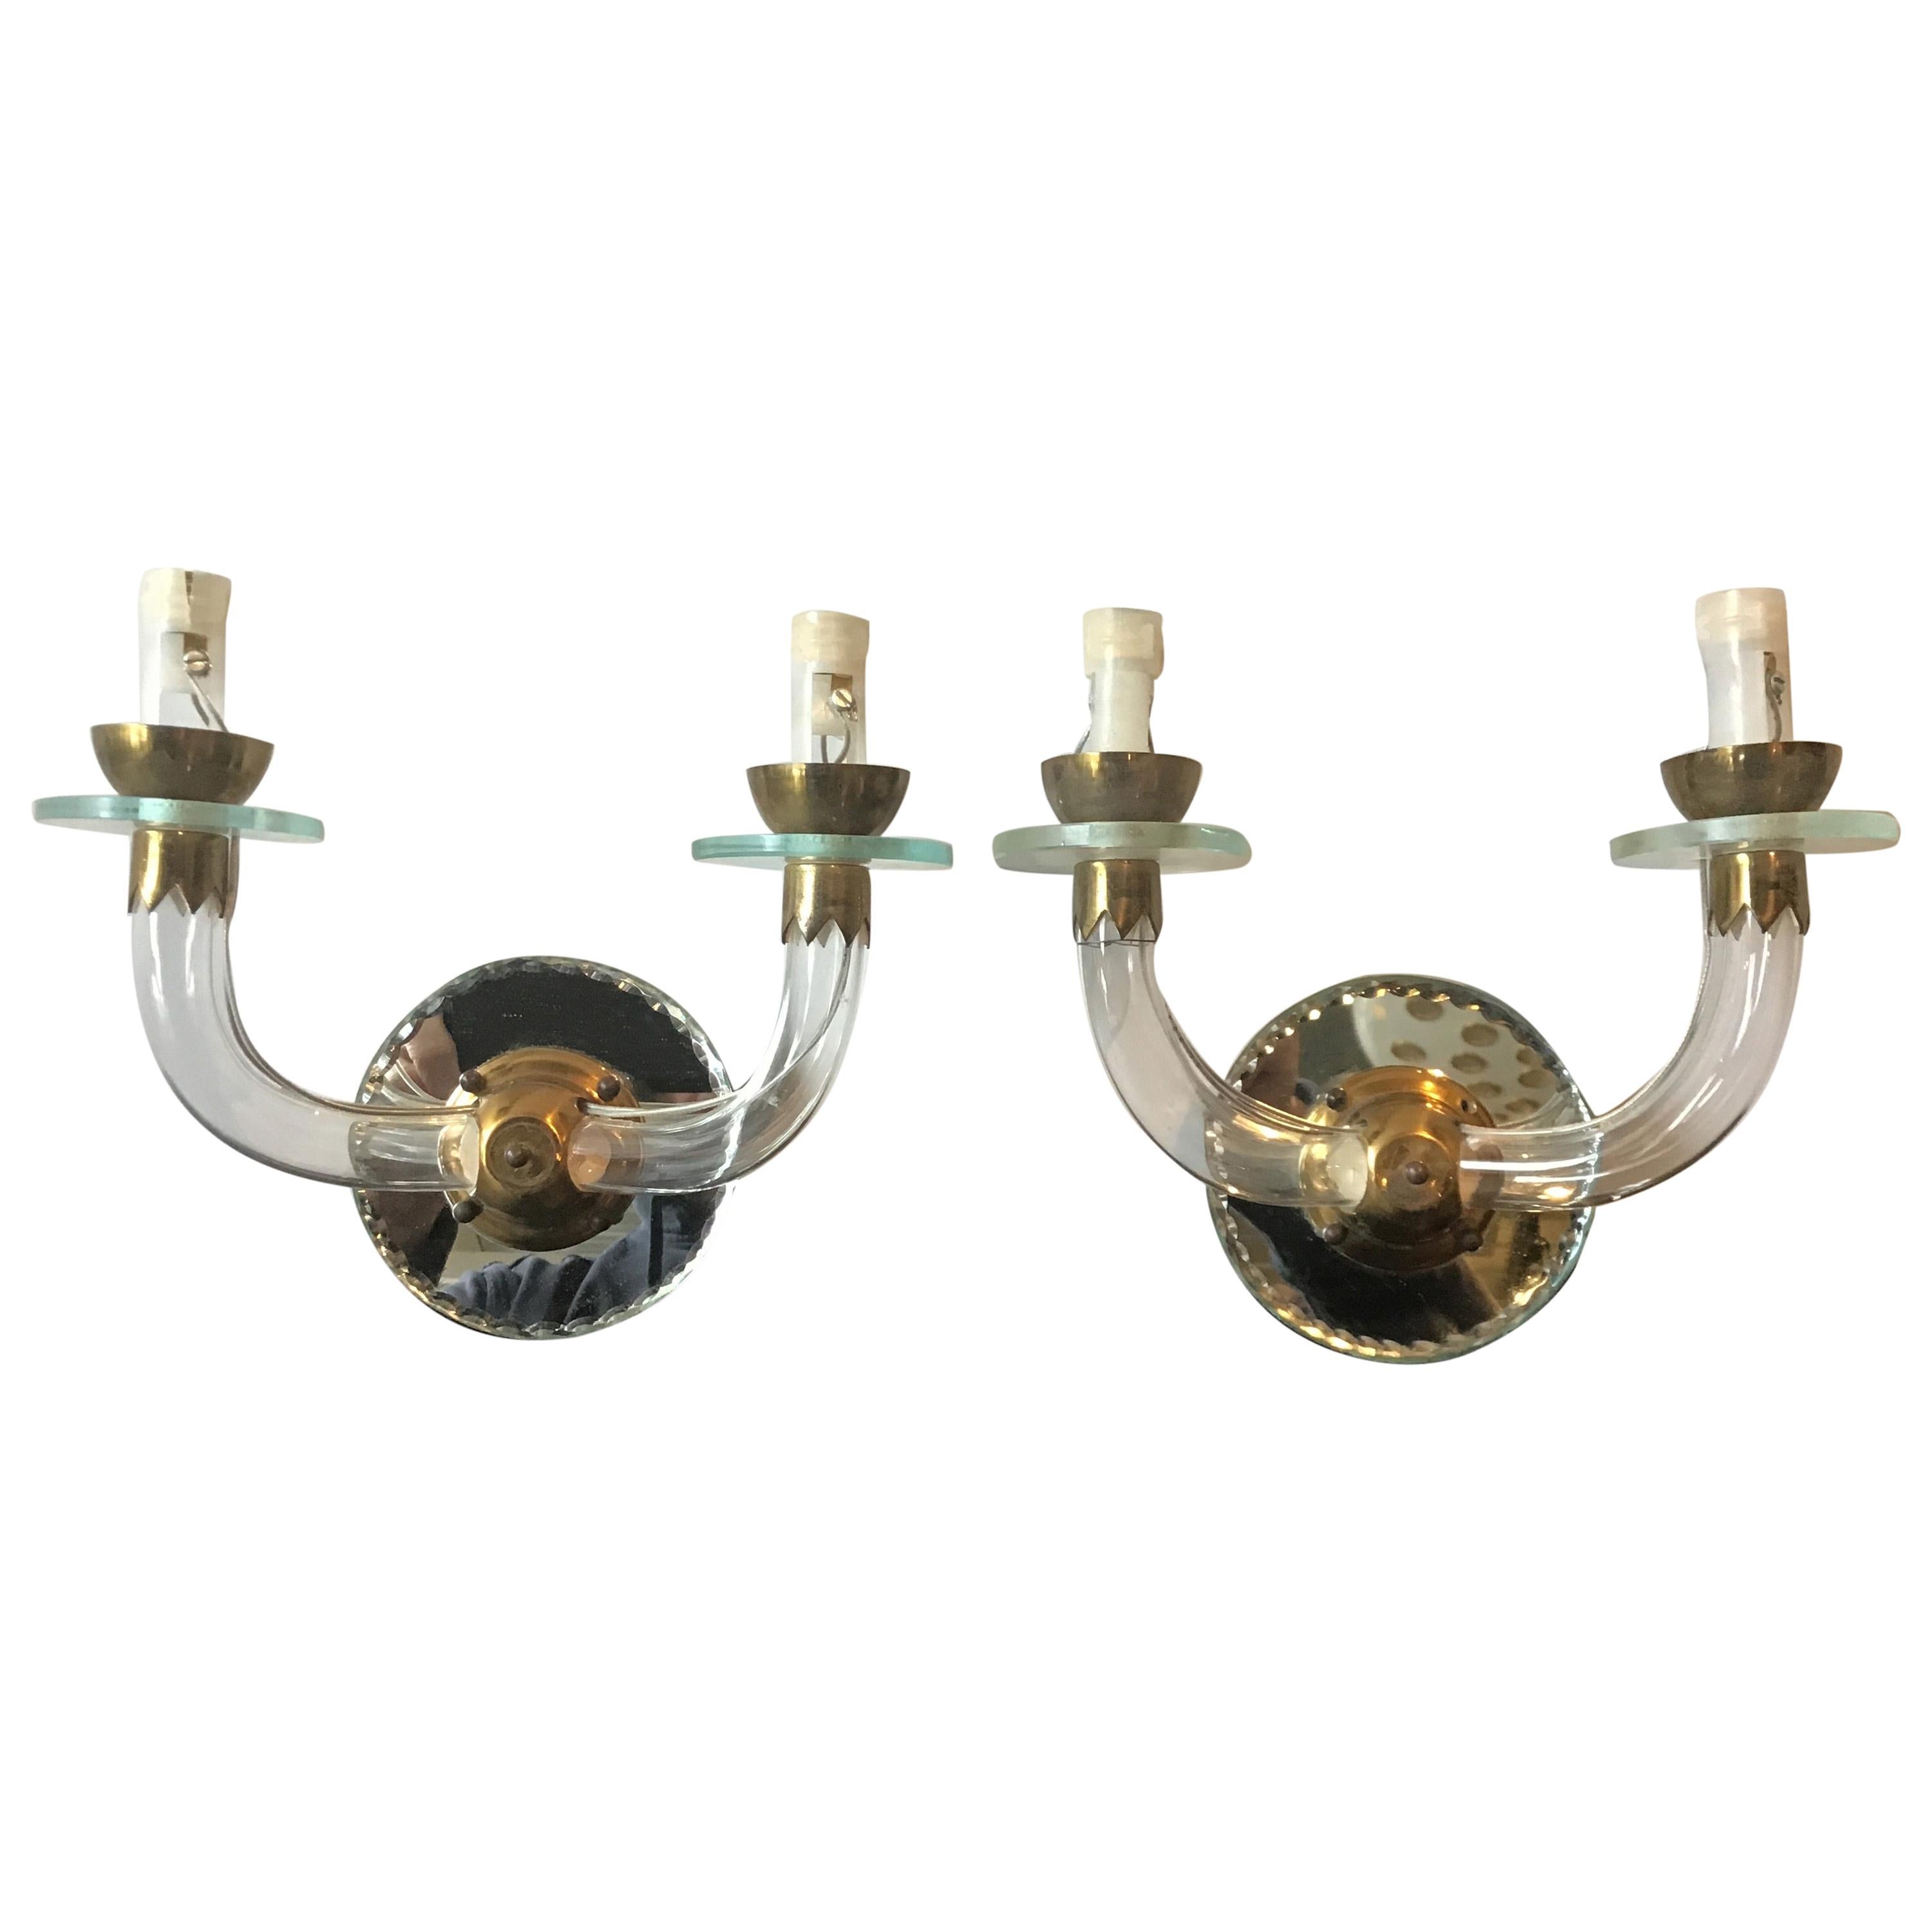 Pair of Small 1940s French Mirrored Back Sconces with Glass Arms